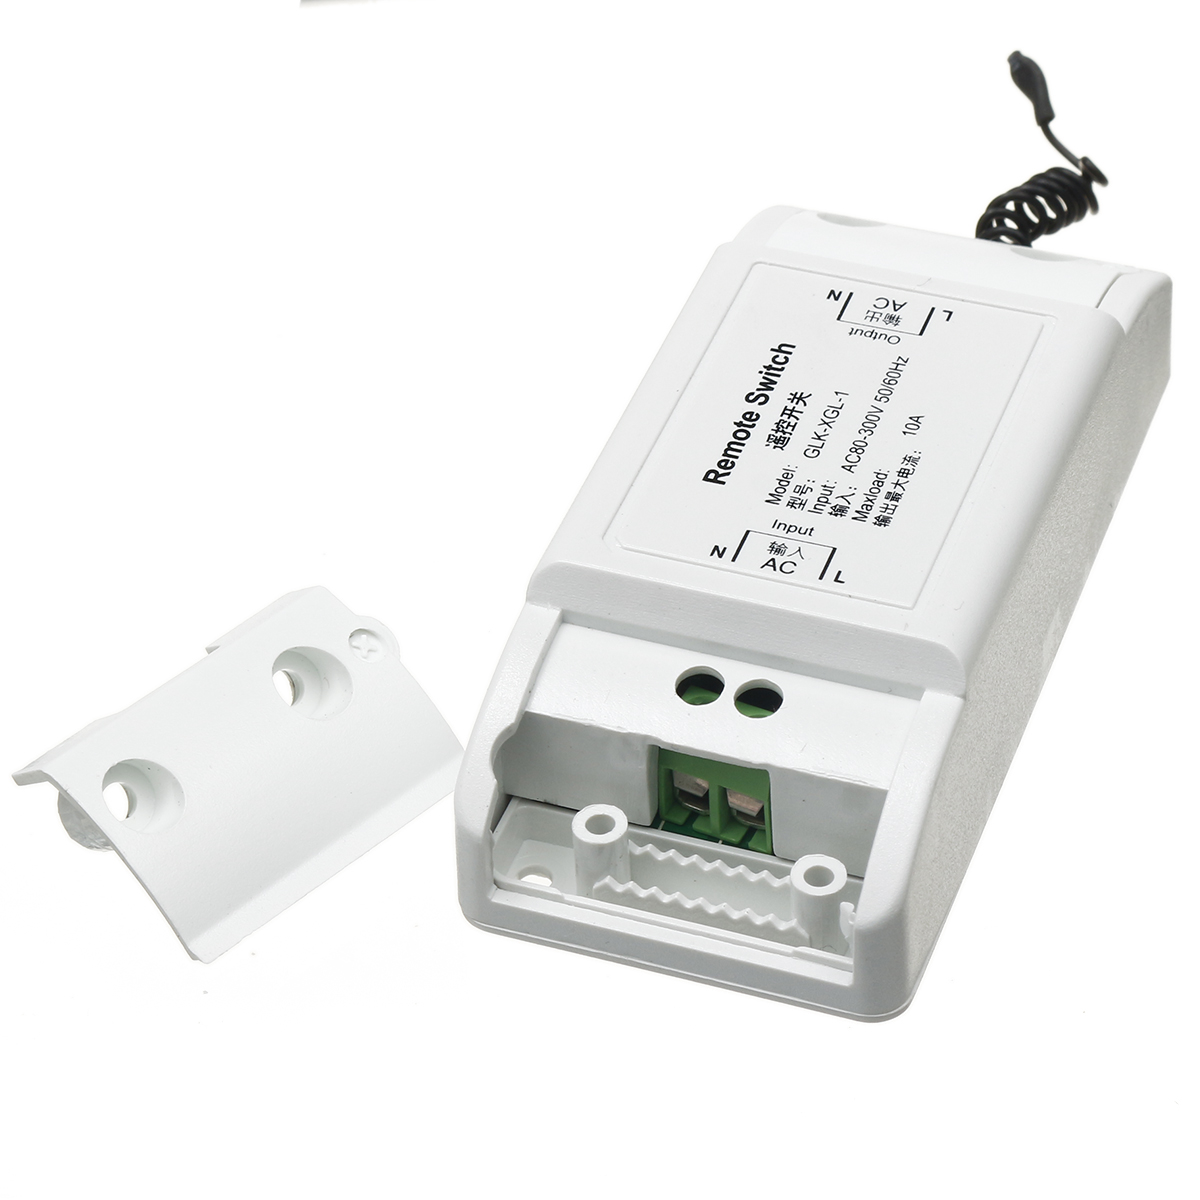 12Way-Lamp-Light-Wireless-Remote-Control-Switch-Receiver-Transmitter-ONOFF-Switch-Controller-1304488-7